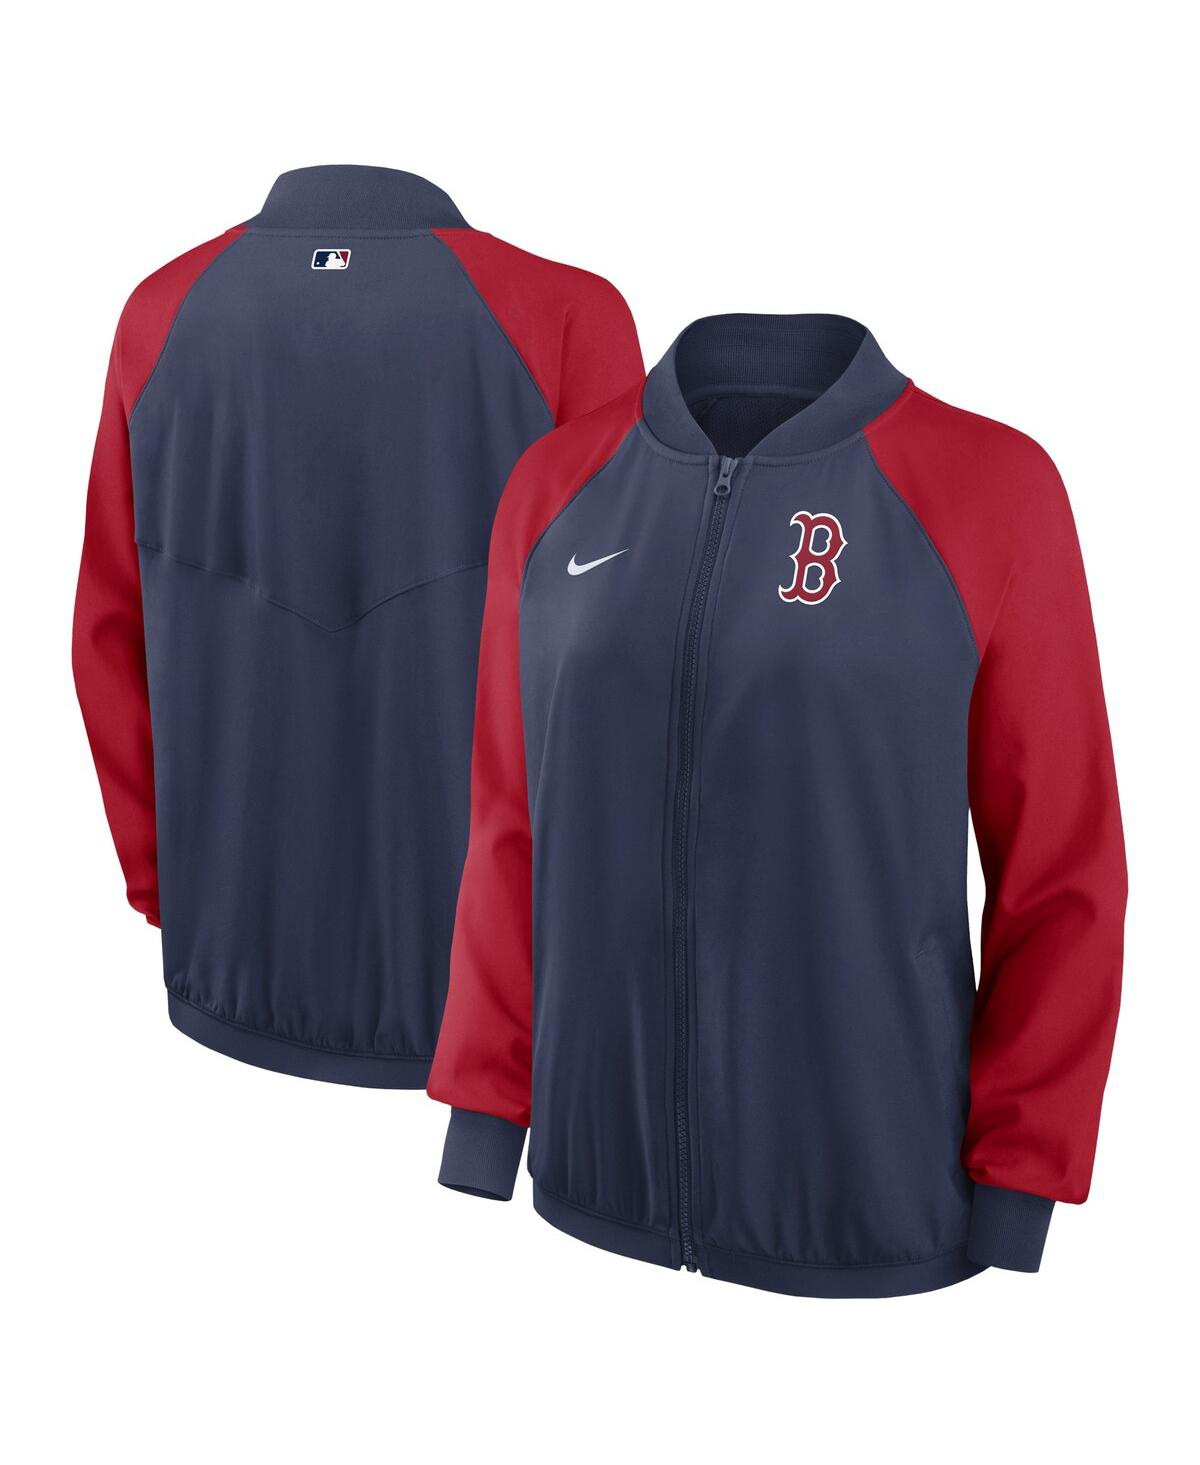 Nike Women's  Navy Boston Red Sox Authentic Collection Team Raglan Performance Full-zip Jacket